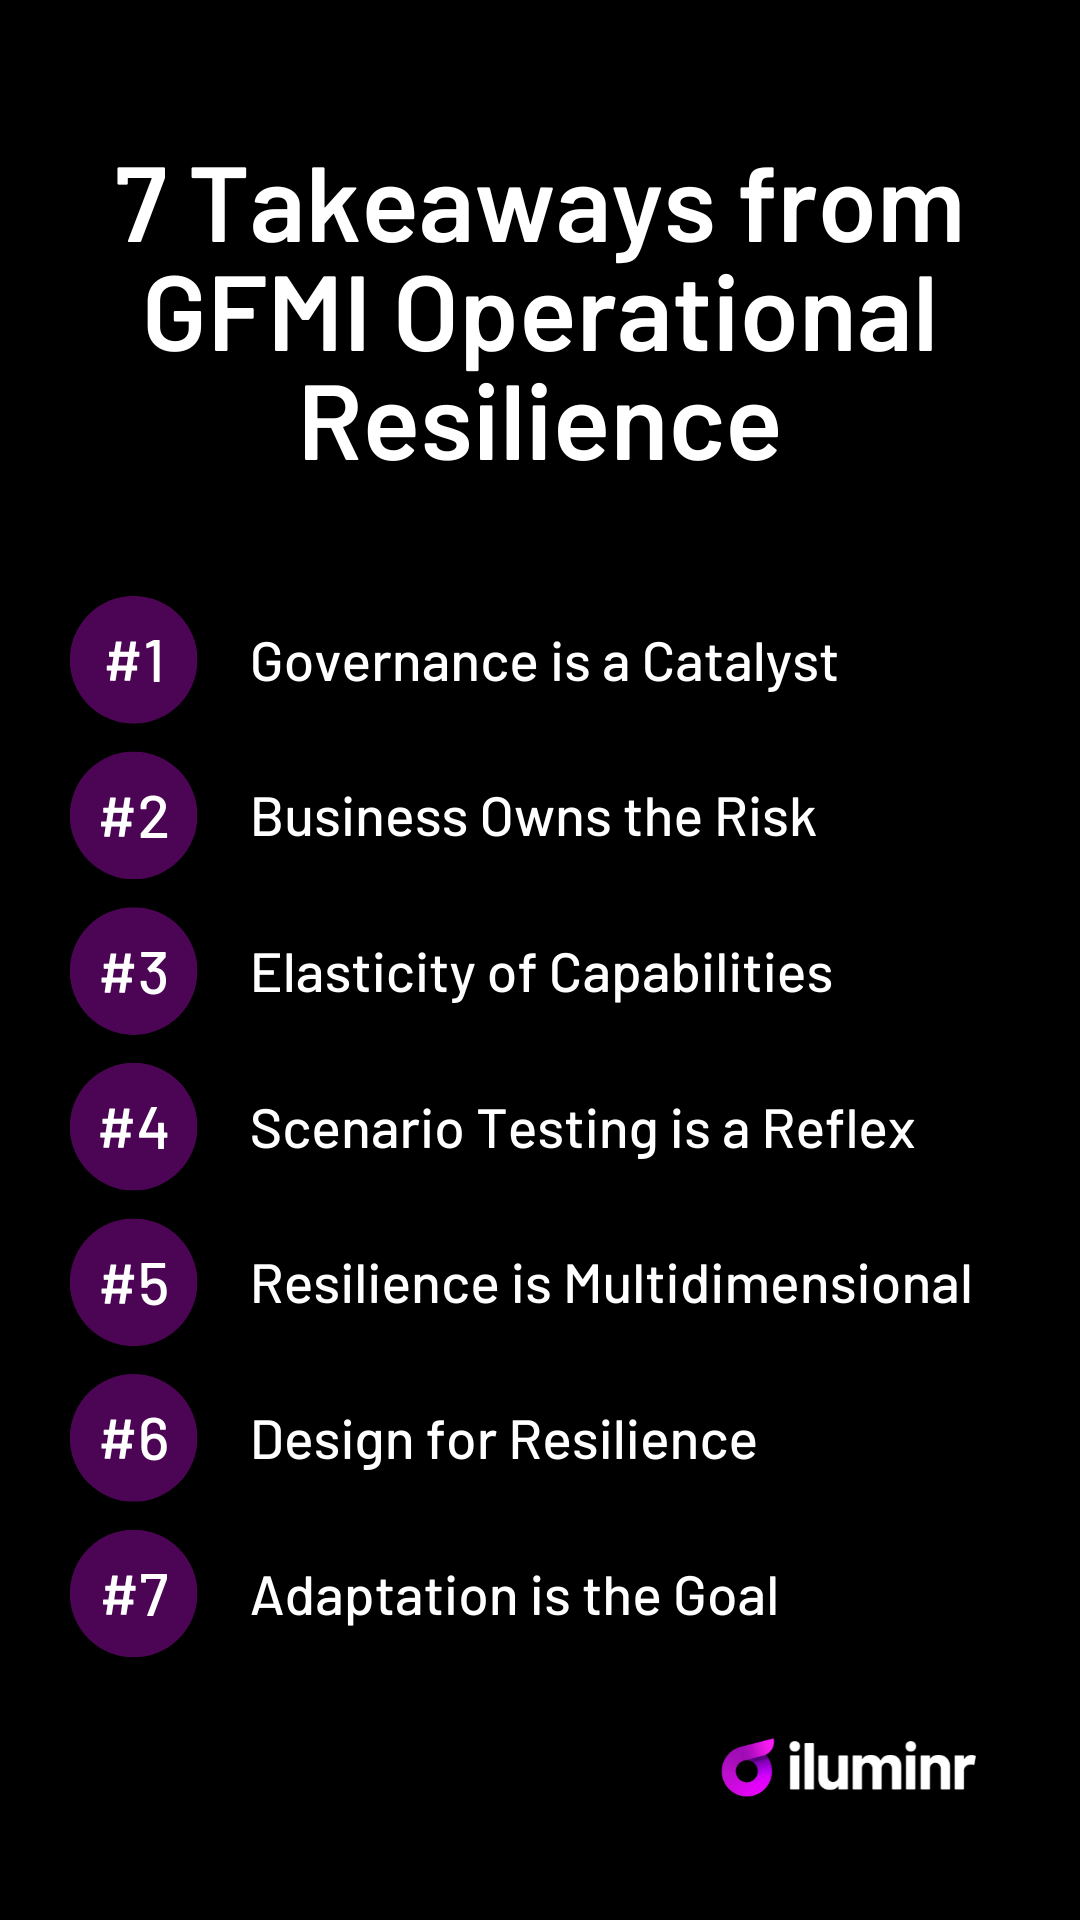 7 Takeaways on Operational Resilience